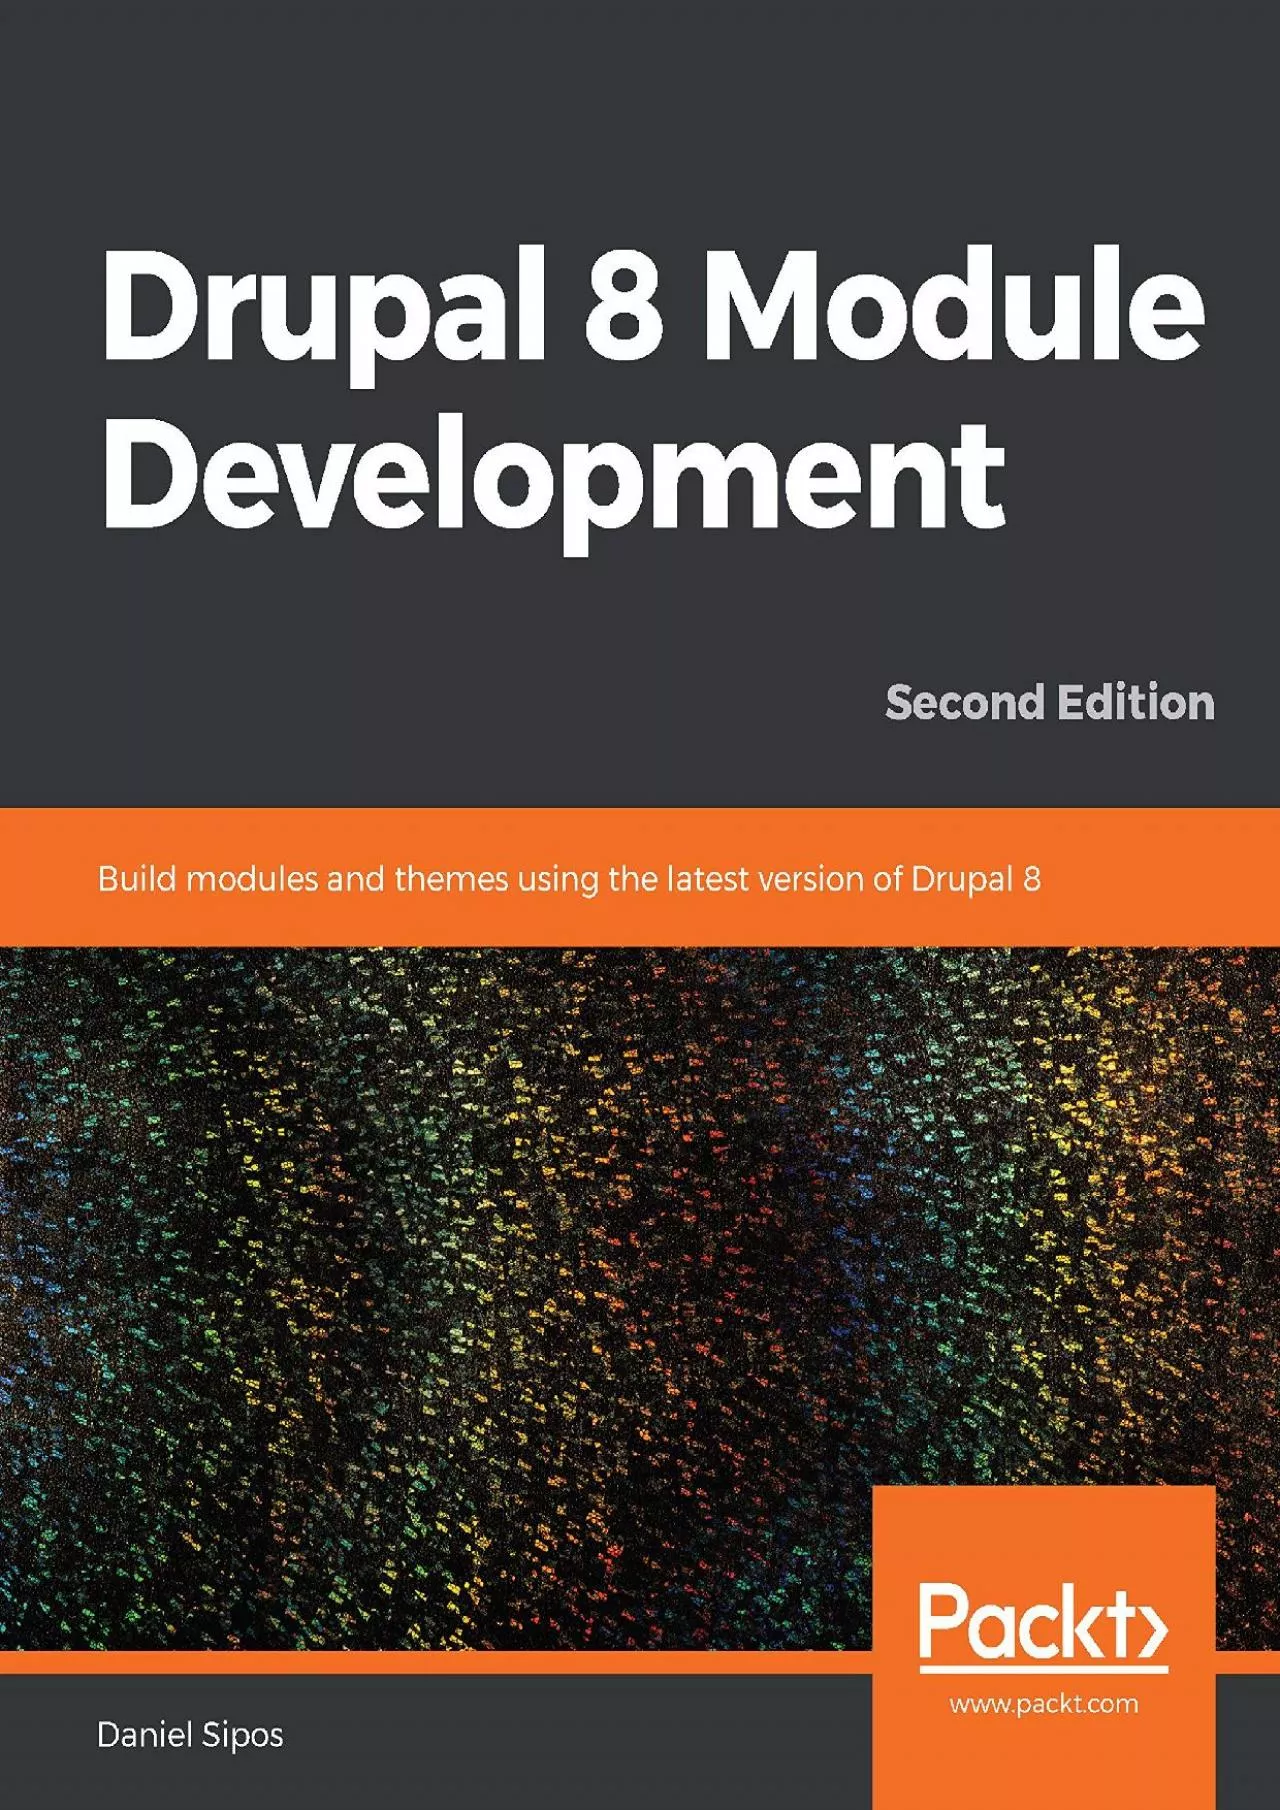 (EBOOK)-Drupal 8 Module Development: Build modules and themes using the latest version